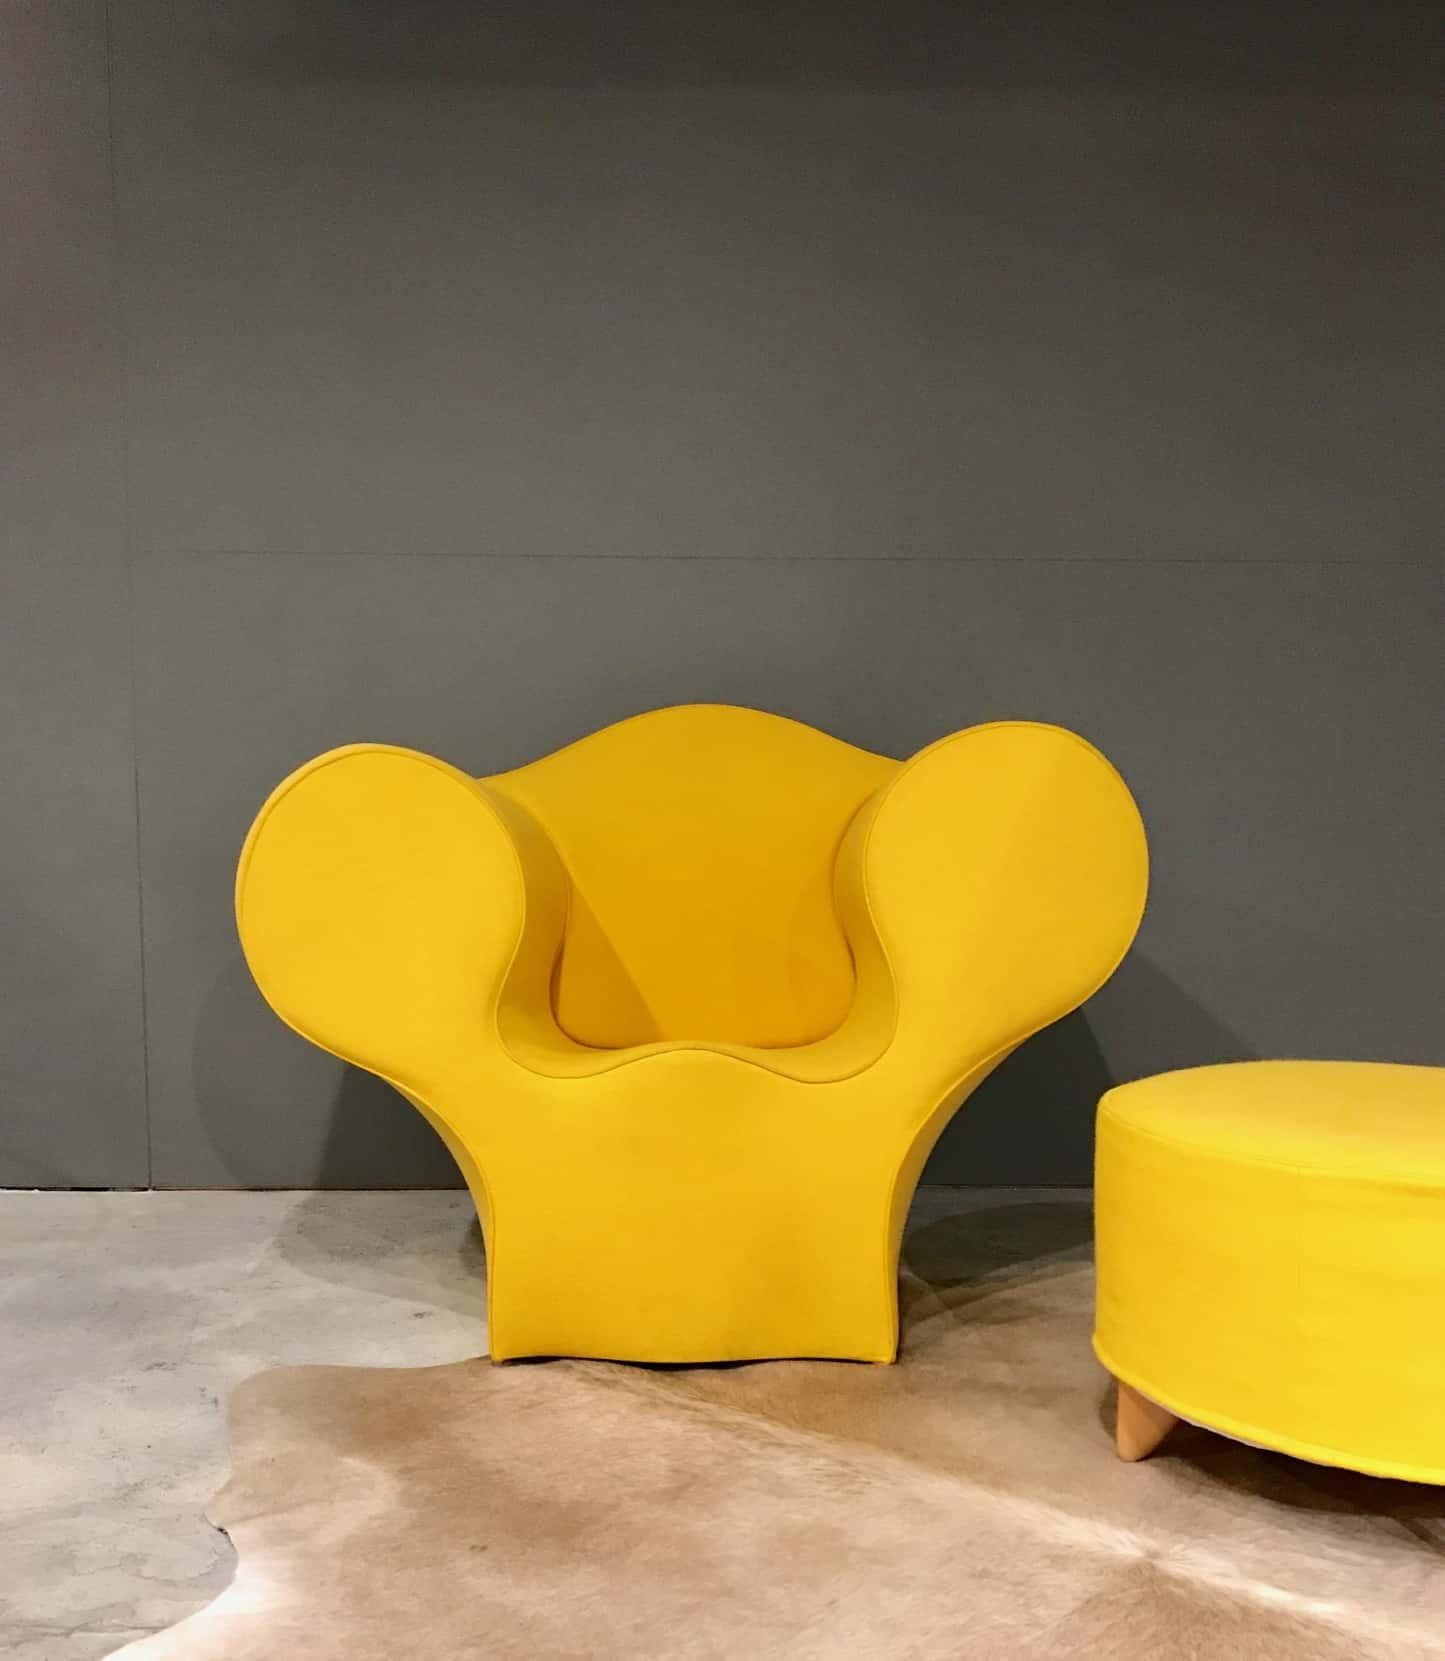 Vibrant in yellow, a soft big easy chair and ottoman, by Ron Arad for Morroso, Italy, 1988.